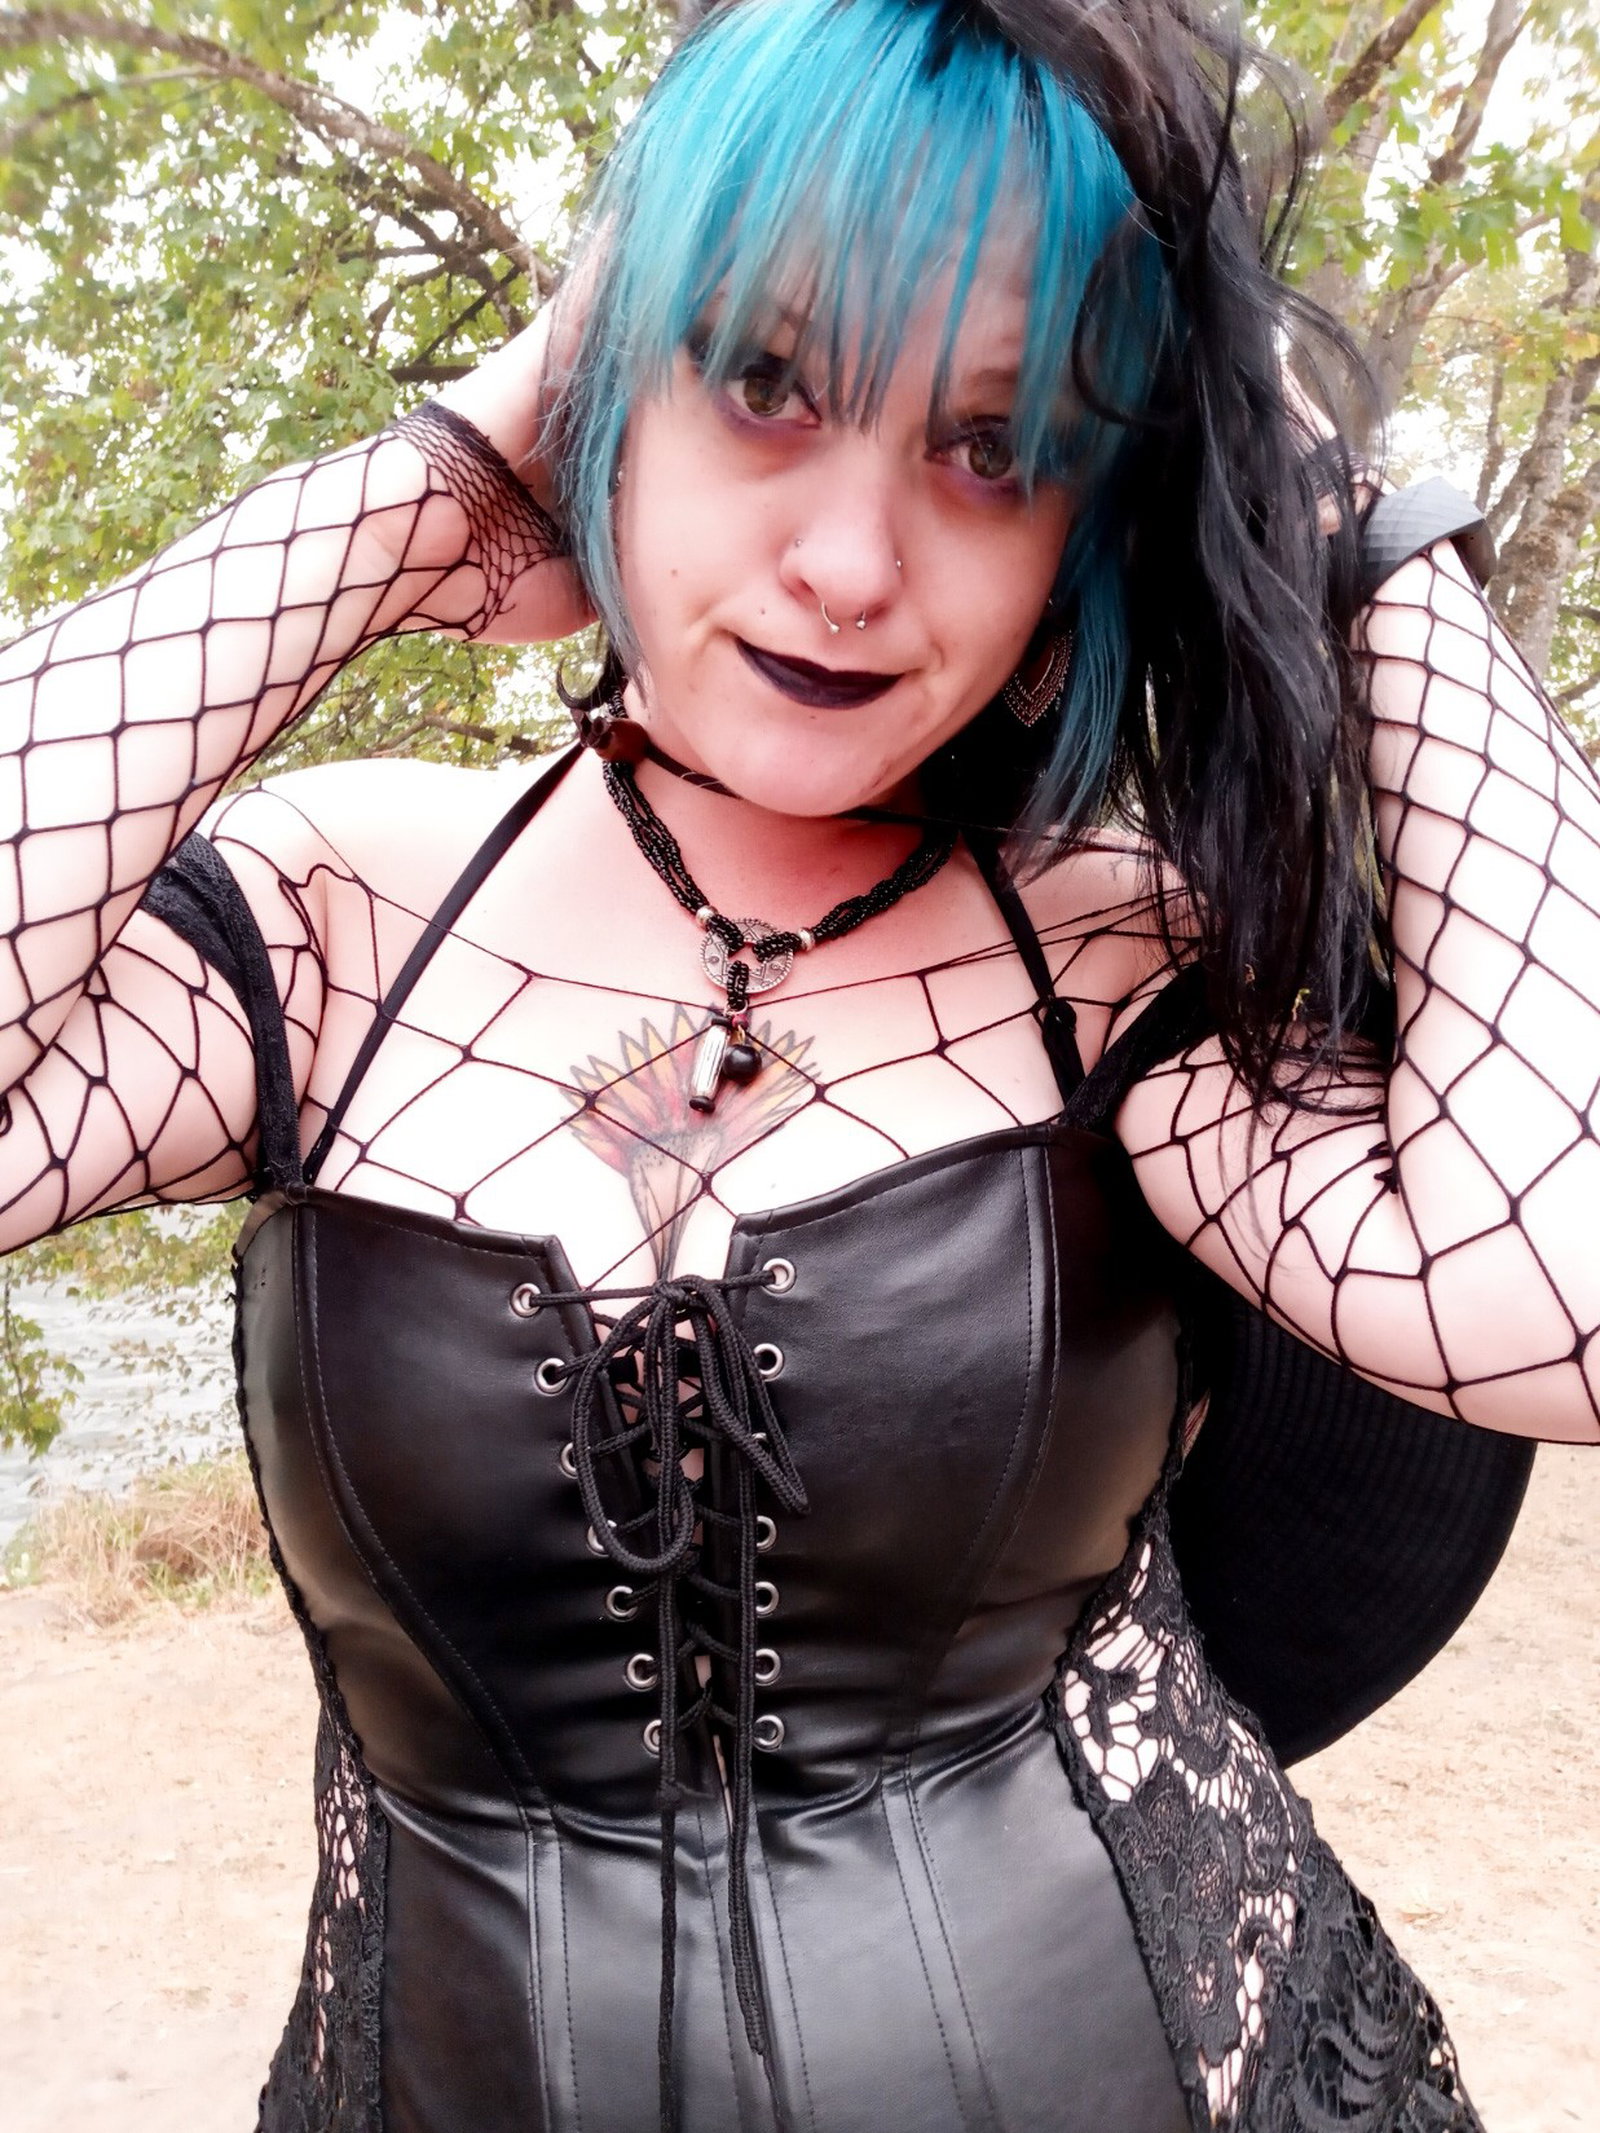 Photo by villainous vixen with the username @villainousvixen, who is a star user,  September 12, 2020 at 7:45 AM and the text says 'https://onlyfans.com/action/trial/m2q0mlmozav2udknszhgbsl0e3sfqcek

FREE DAY PASS to my ONLYFANS guys!! Come see all my new content and tell me to do!!'